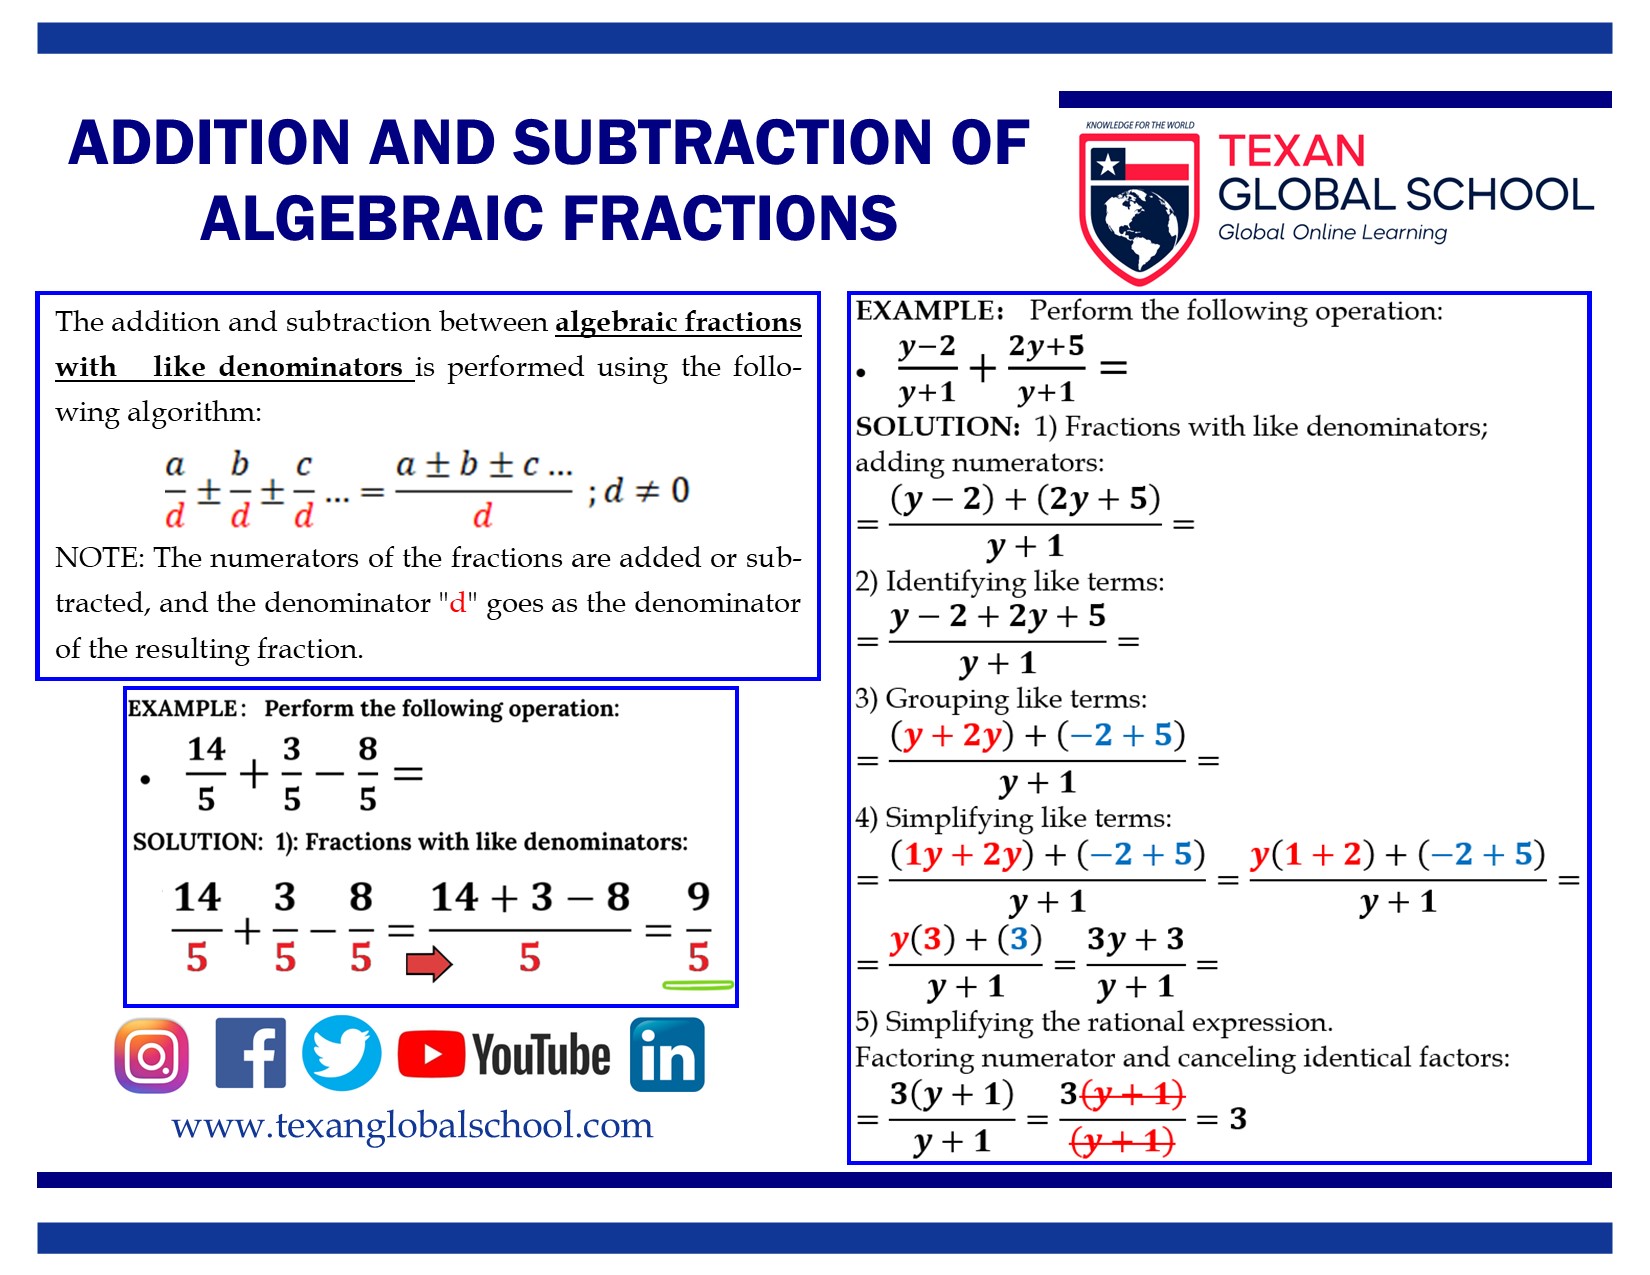 Addition and Subtraction of Algebraic Fractions 1